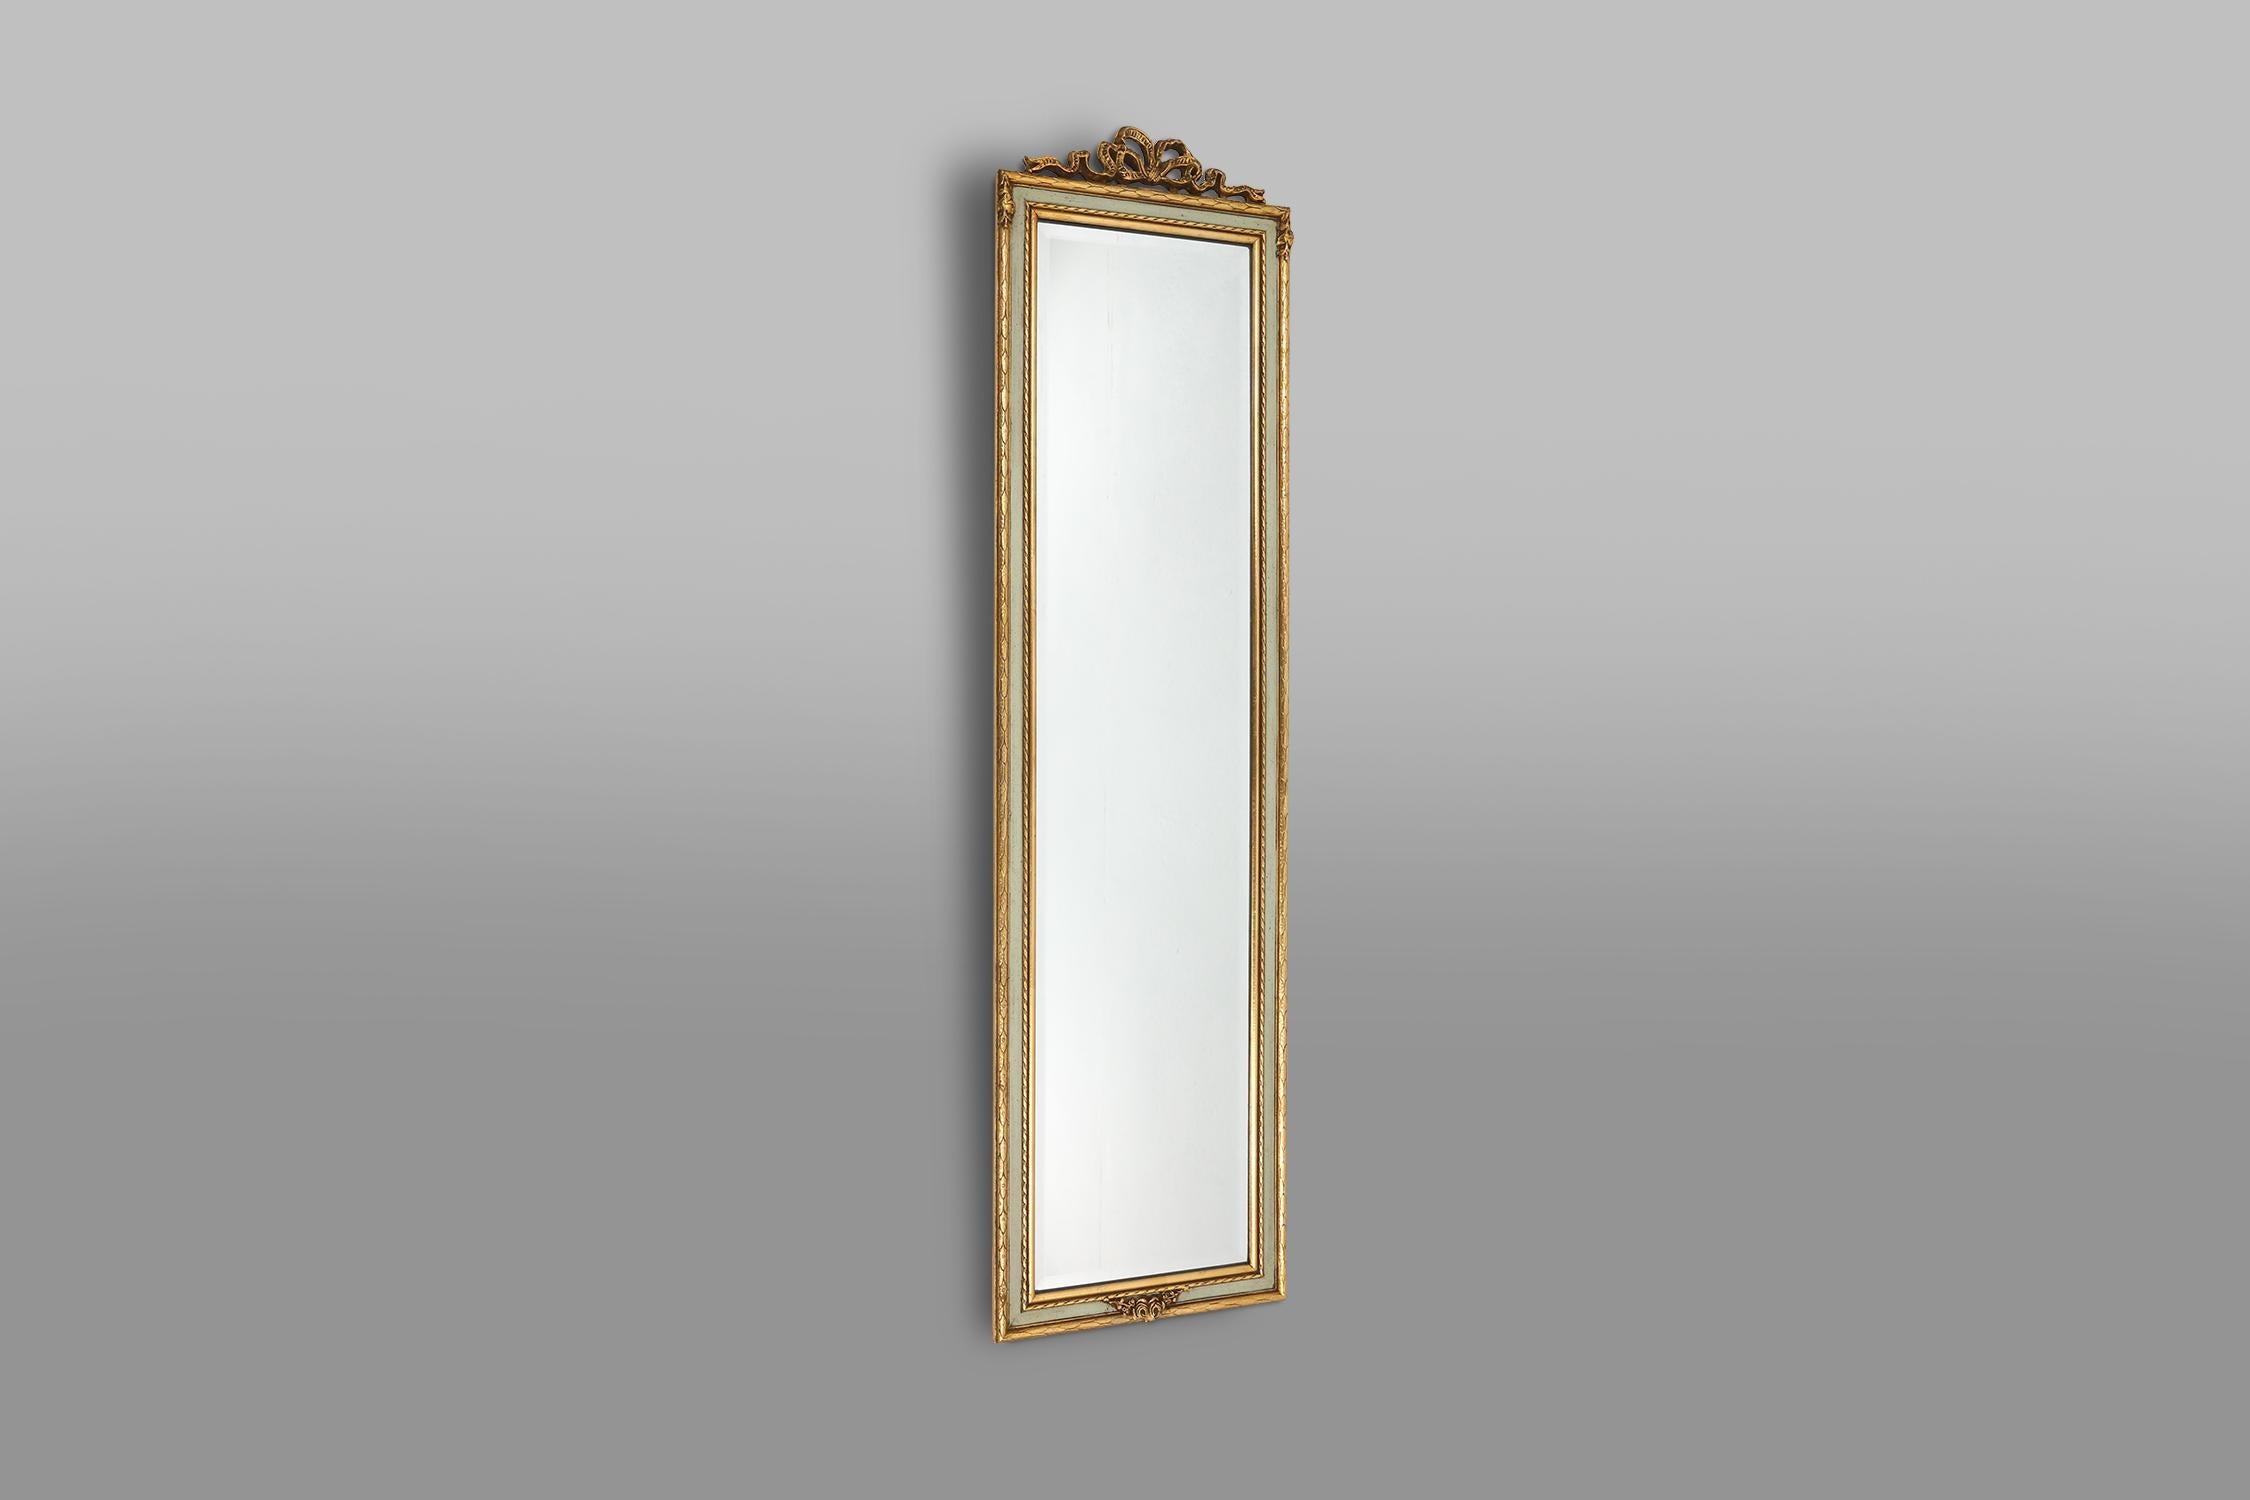 Small golden classic wall mirror with some nice classical details as a bow on top.